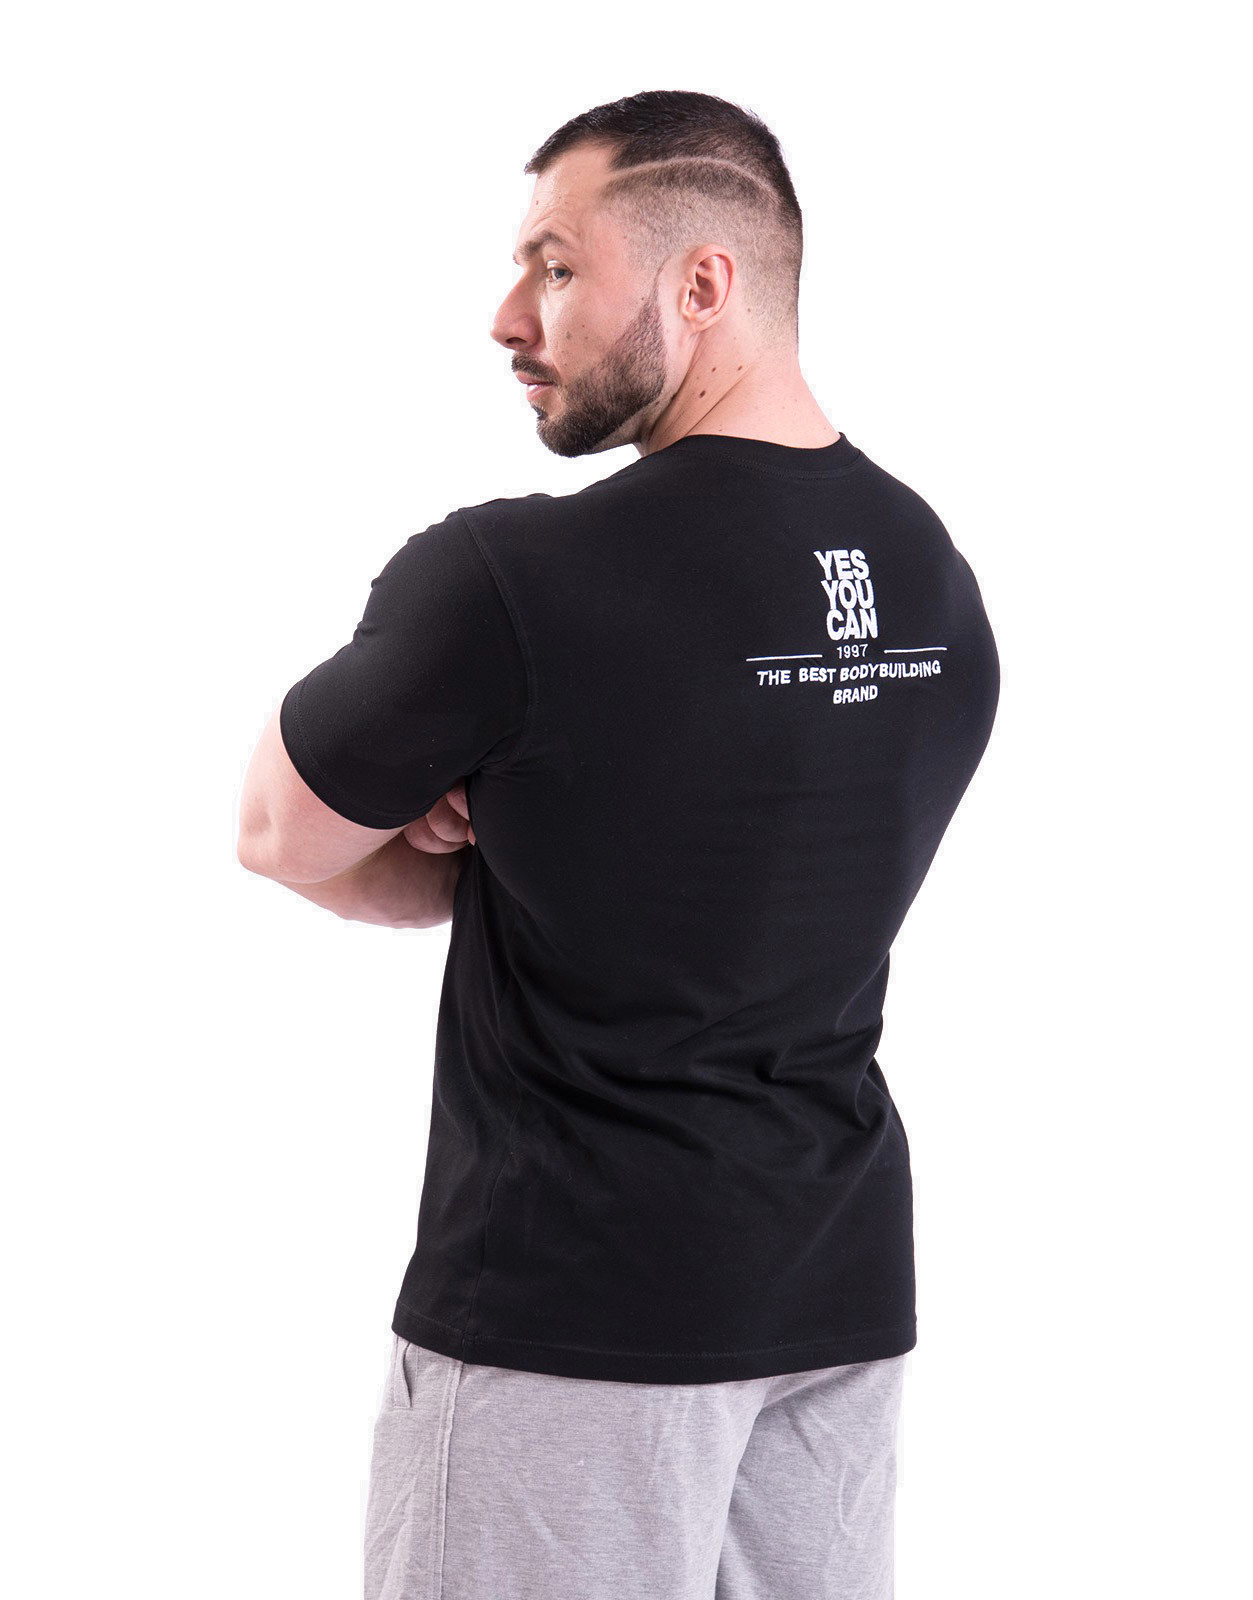 HardCore T-Shirt with Embroidery 396 by Nebbia, Colour: Black ...